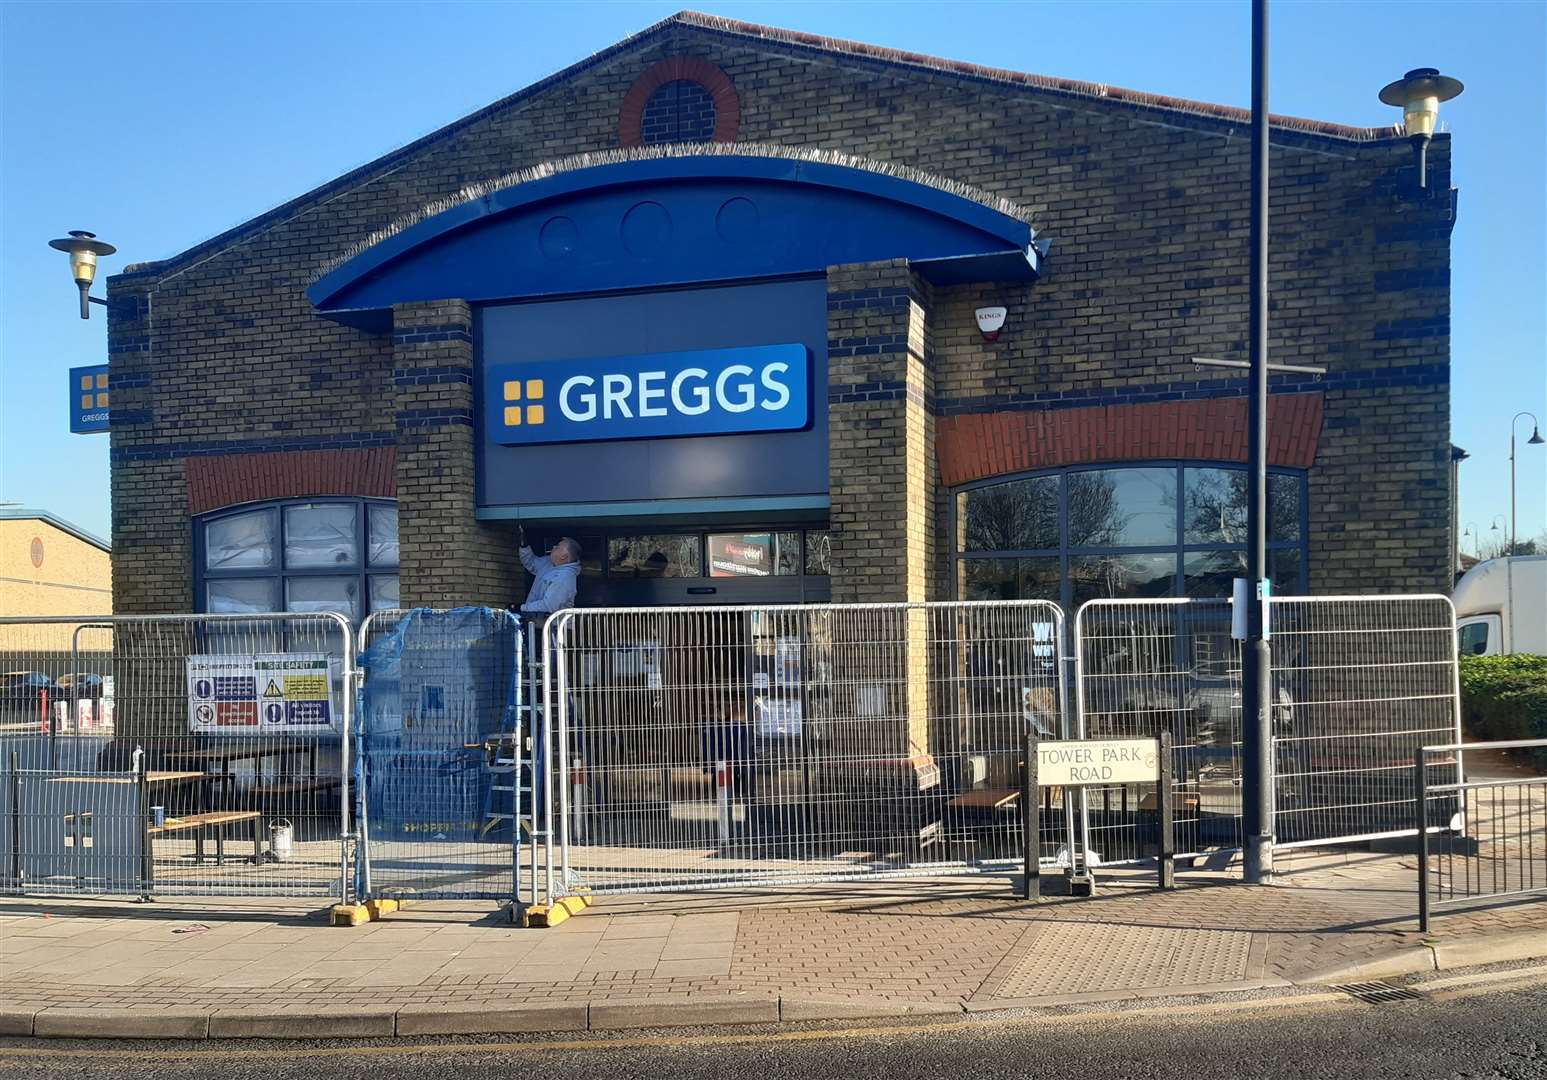 Greggs is set to open its second in Crayford, near Dartford on the site of the Tower Retail park. Photo: Sean Delaney